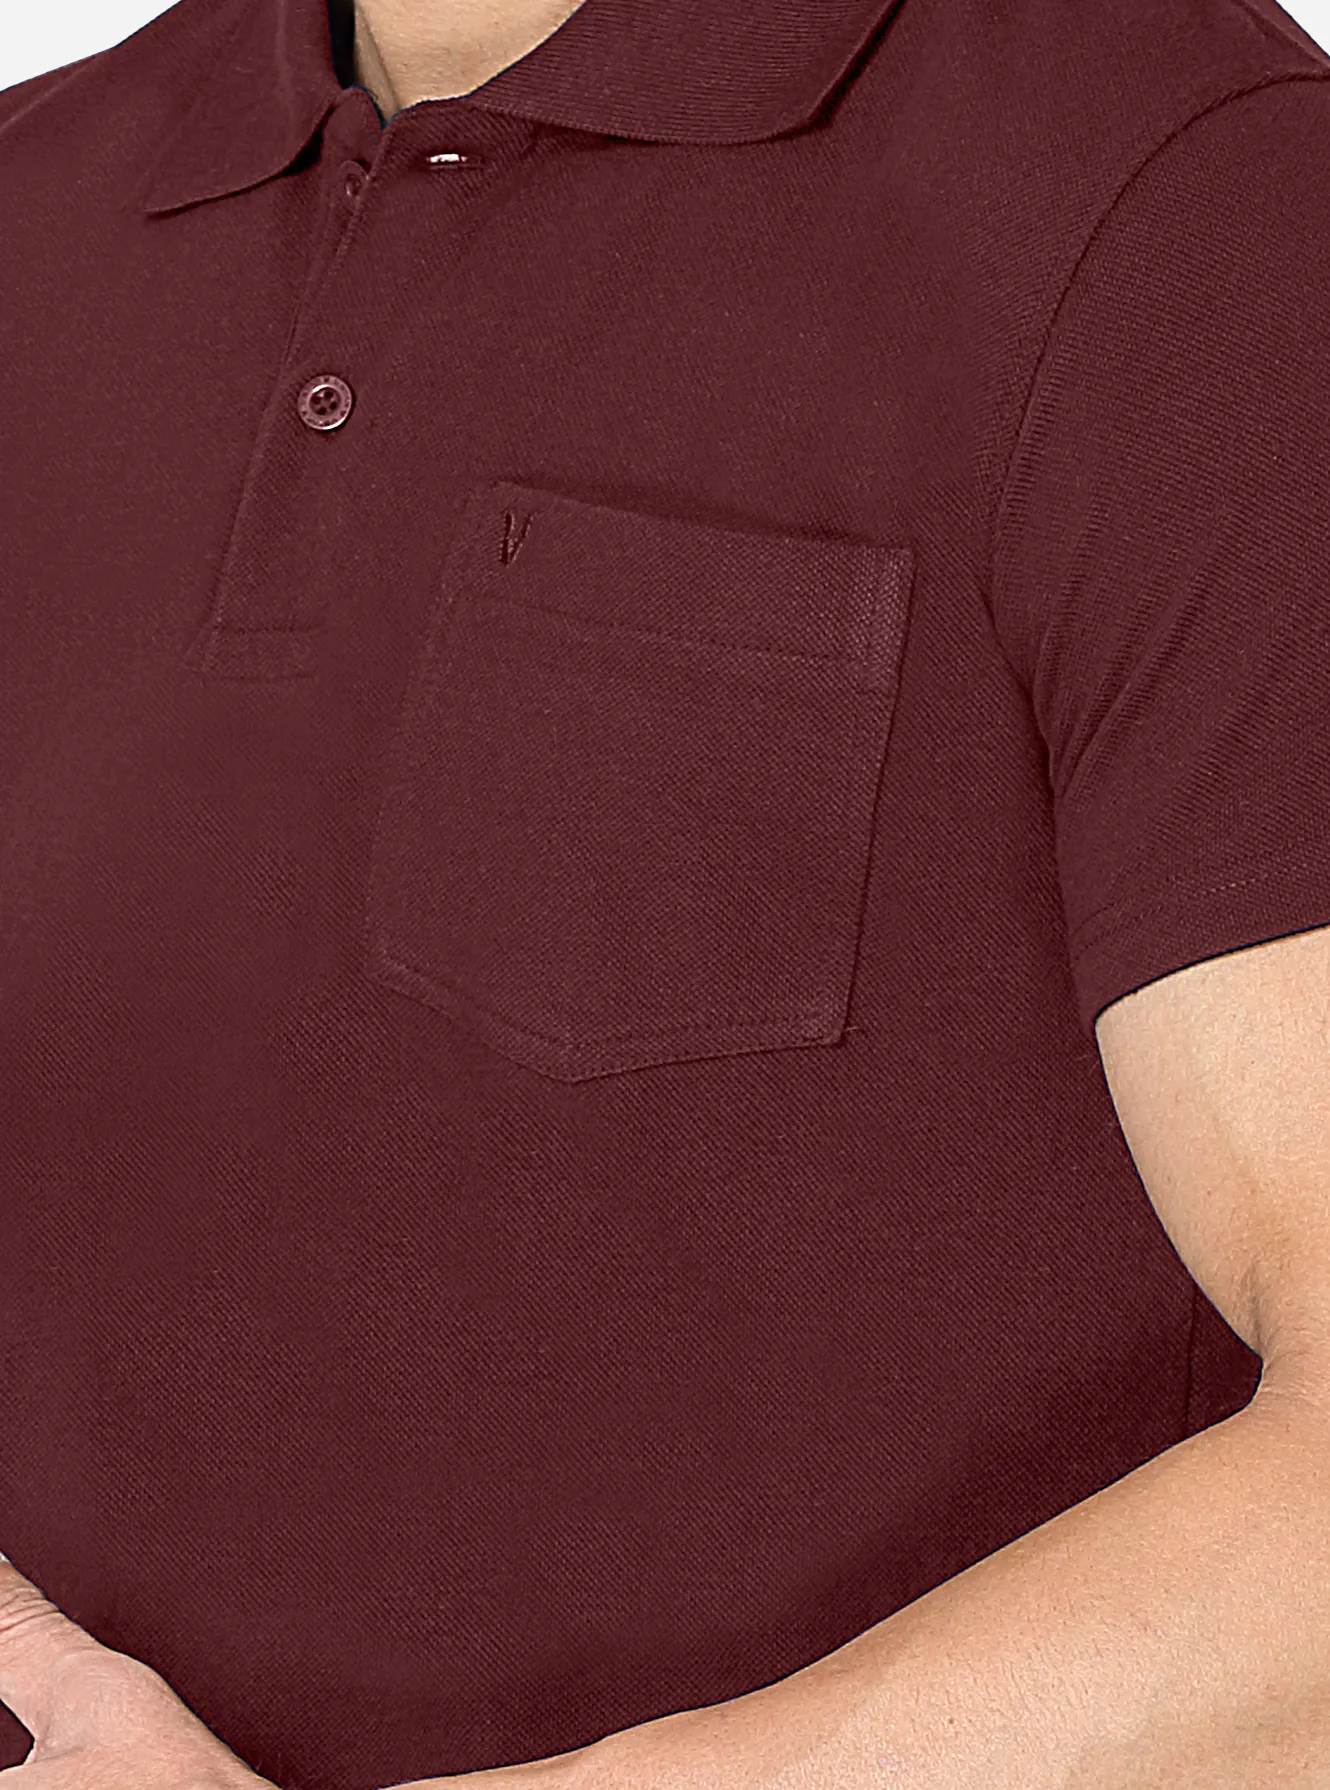 Half sleeved regular fit polo T shirt with pocket